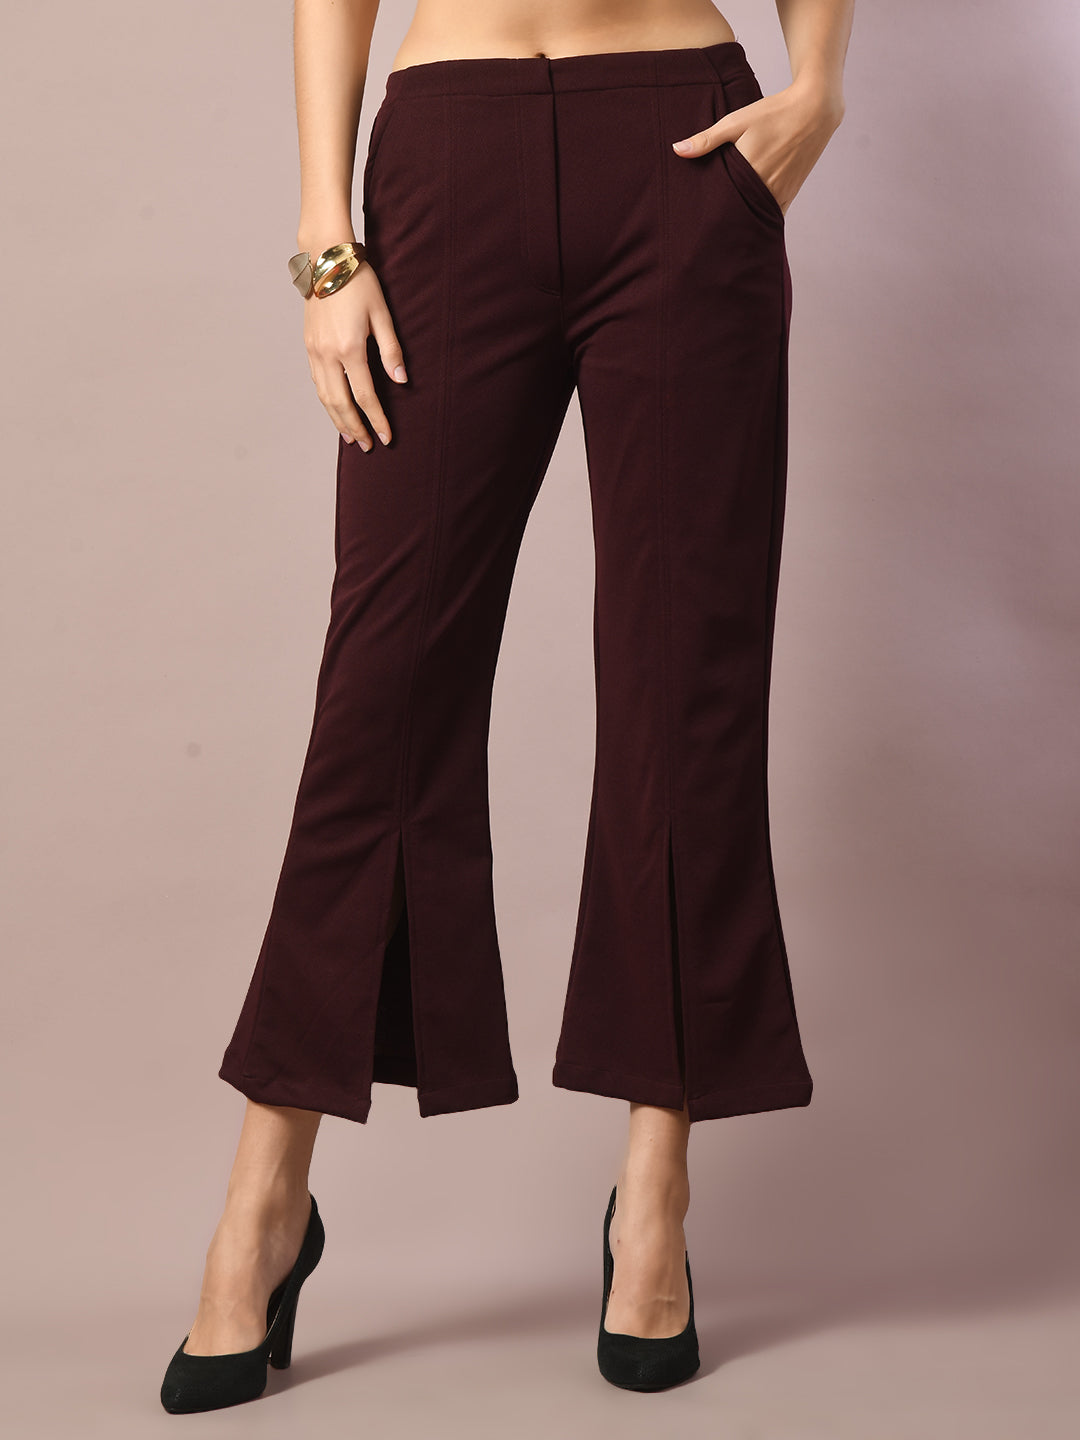 Women's  Coffee Brown Solid Party Parallel Trousers   - Myshka